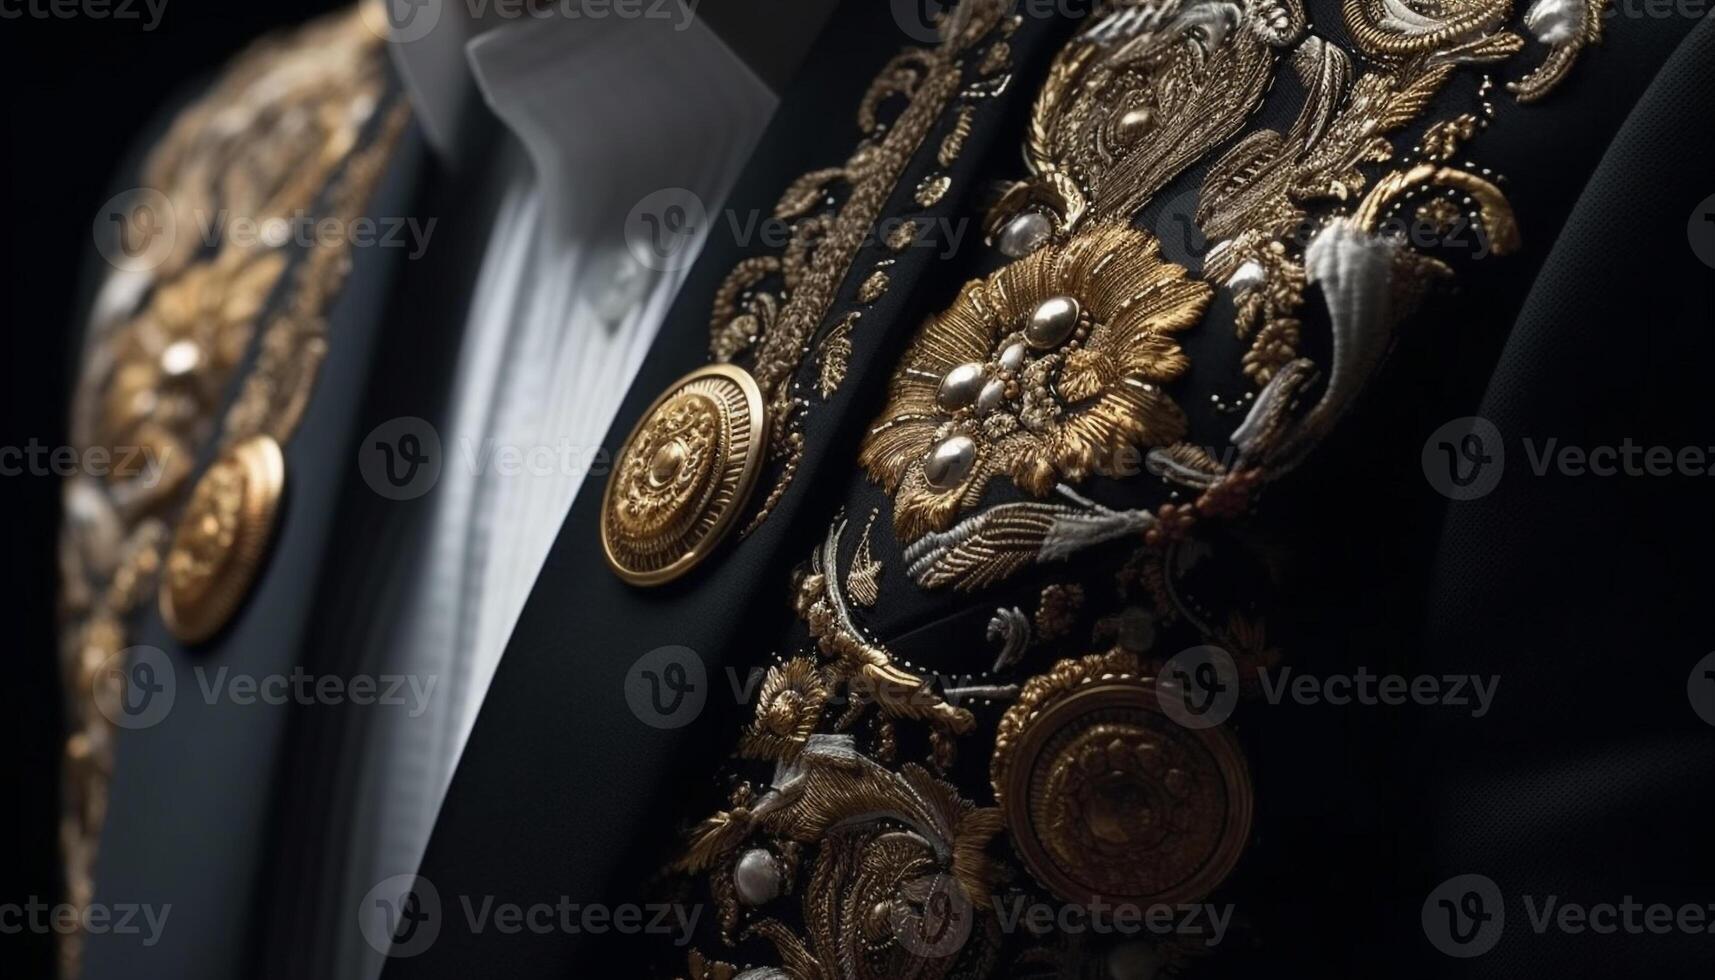 Elegant gold brooch, a traditional accessory for men wedding suits generated by AI photo